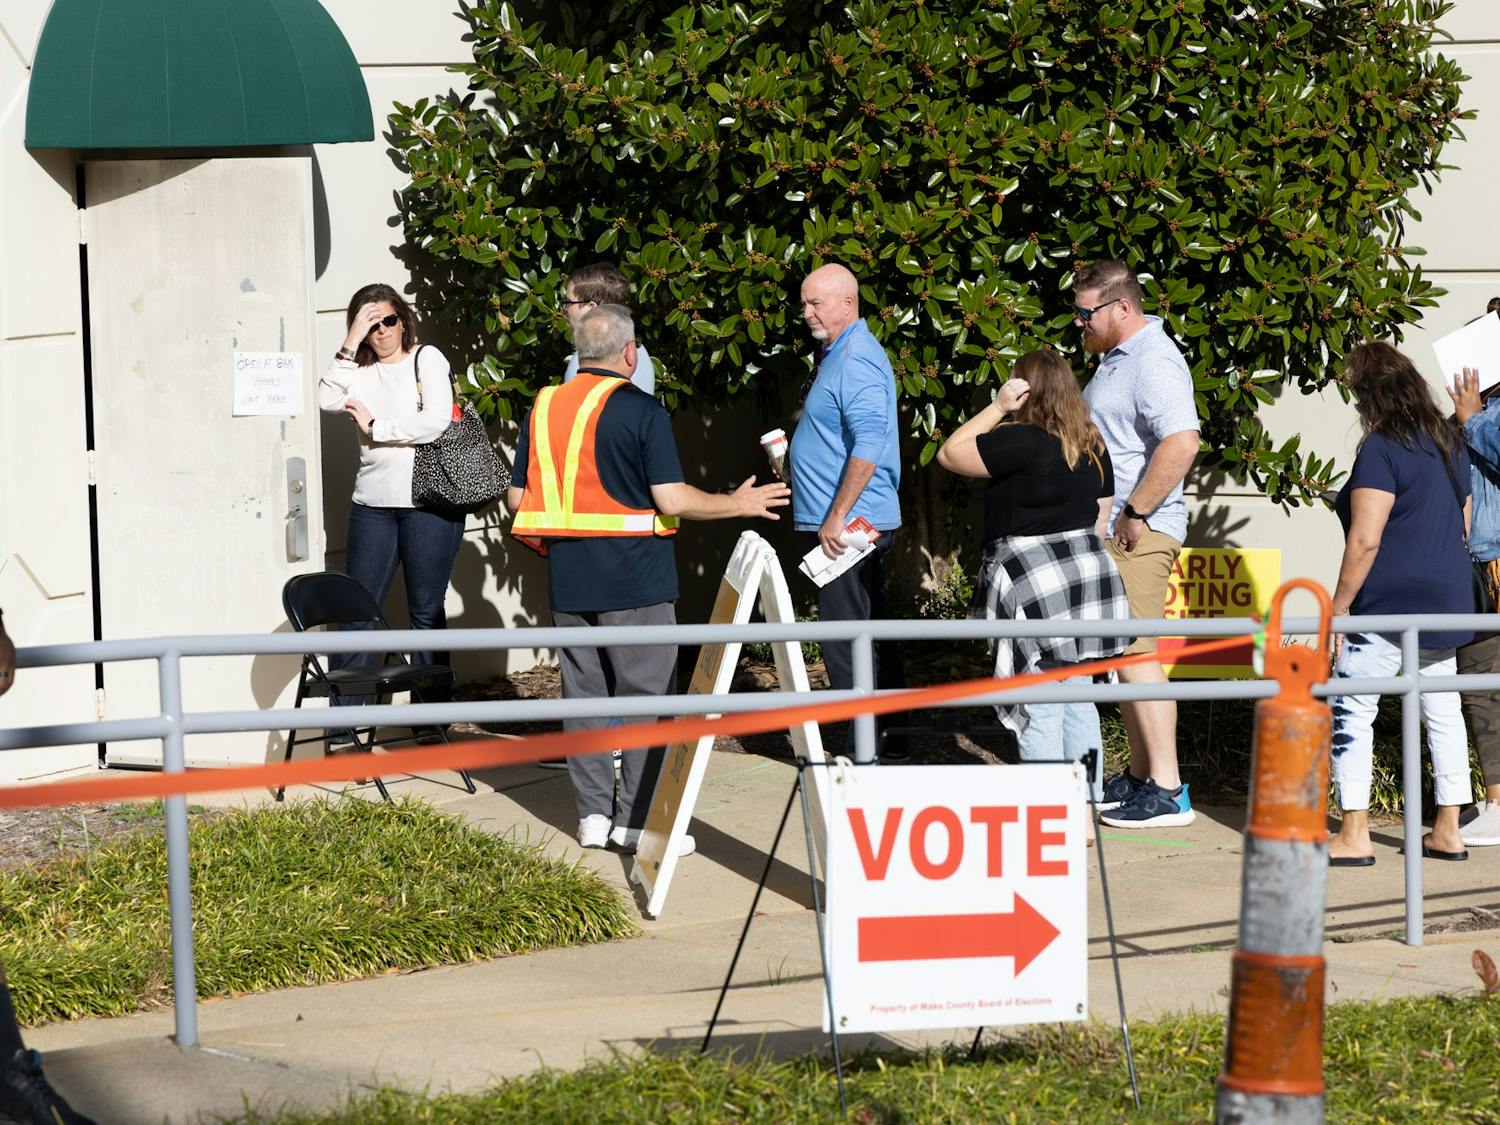 Multiple vested election officials patrol and control the crowds at the Herbert C. Young Community Center voting site on November 3rd, 2022.